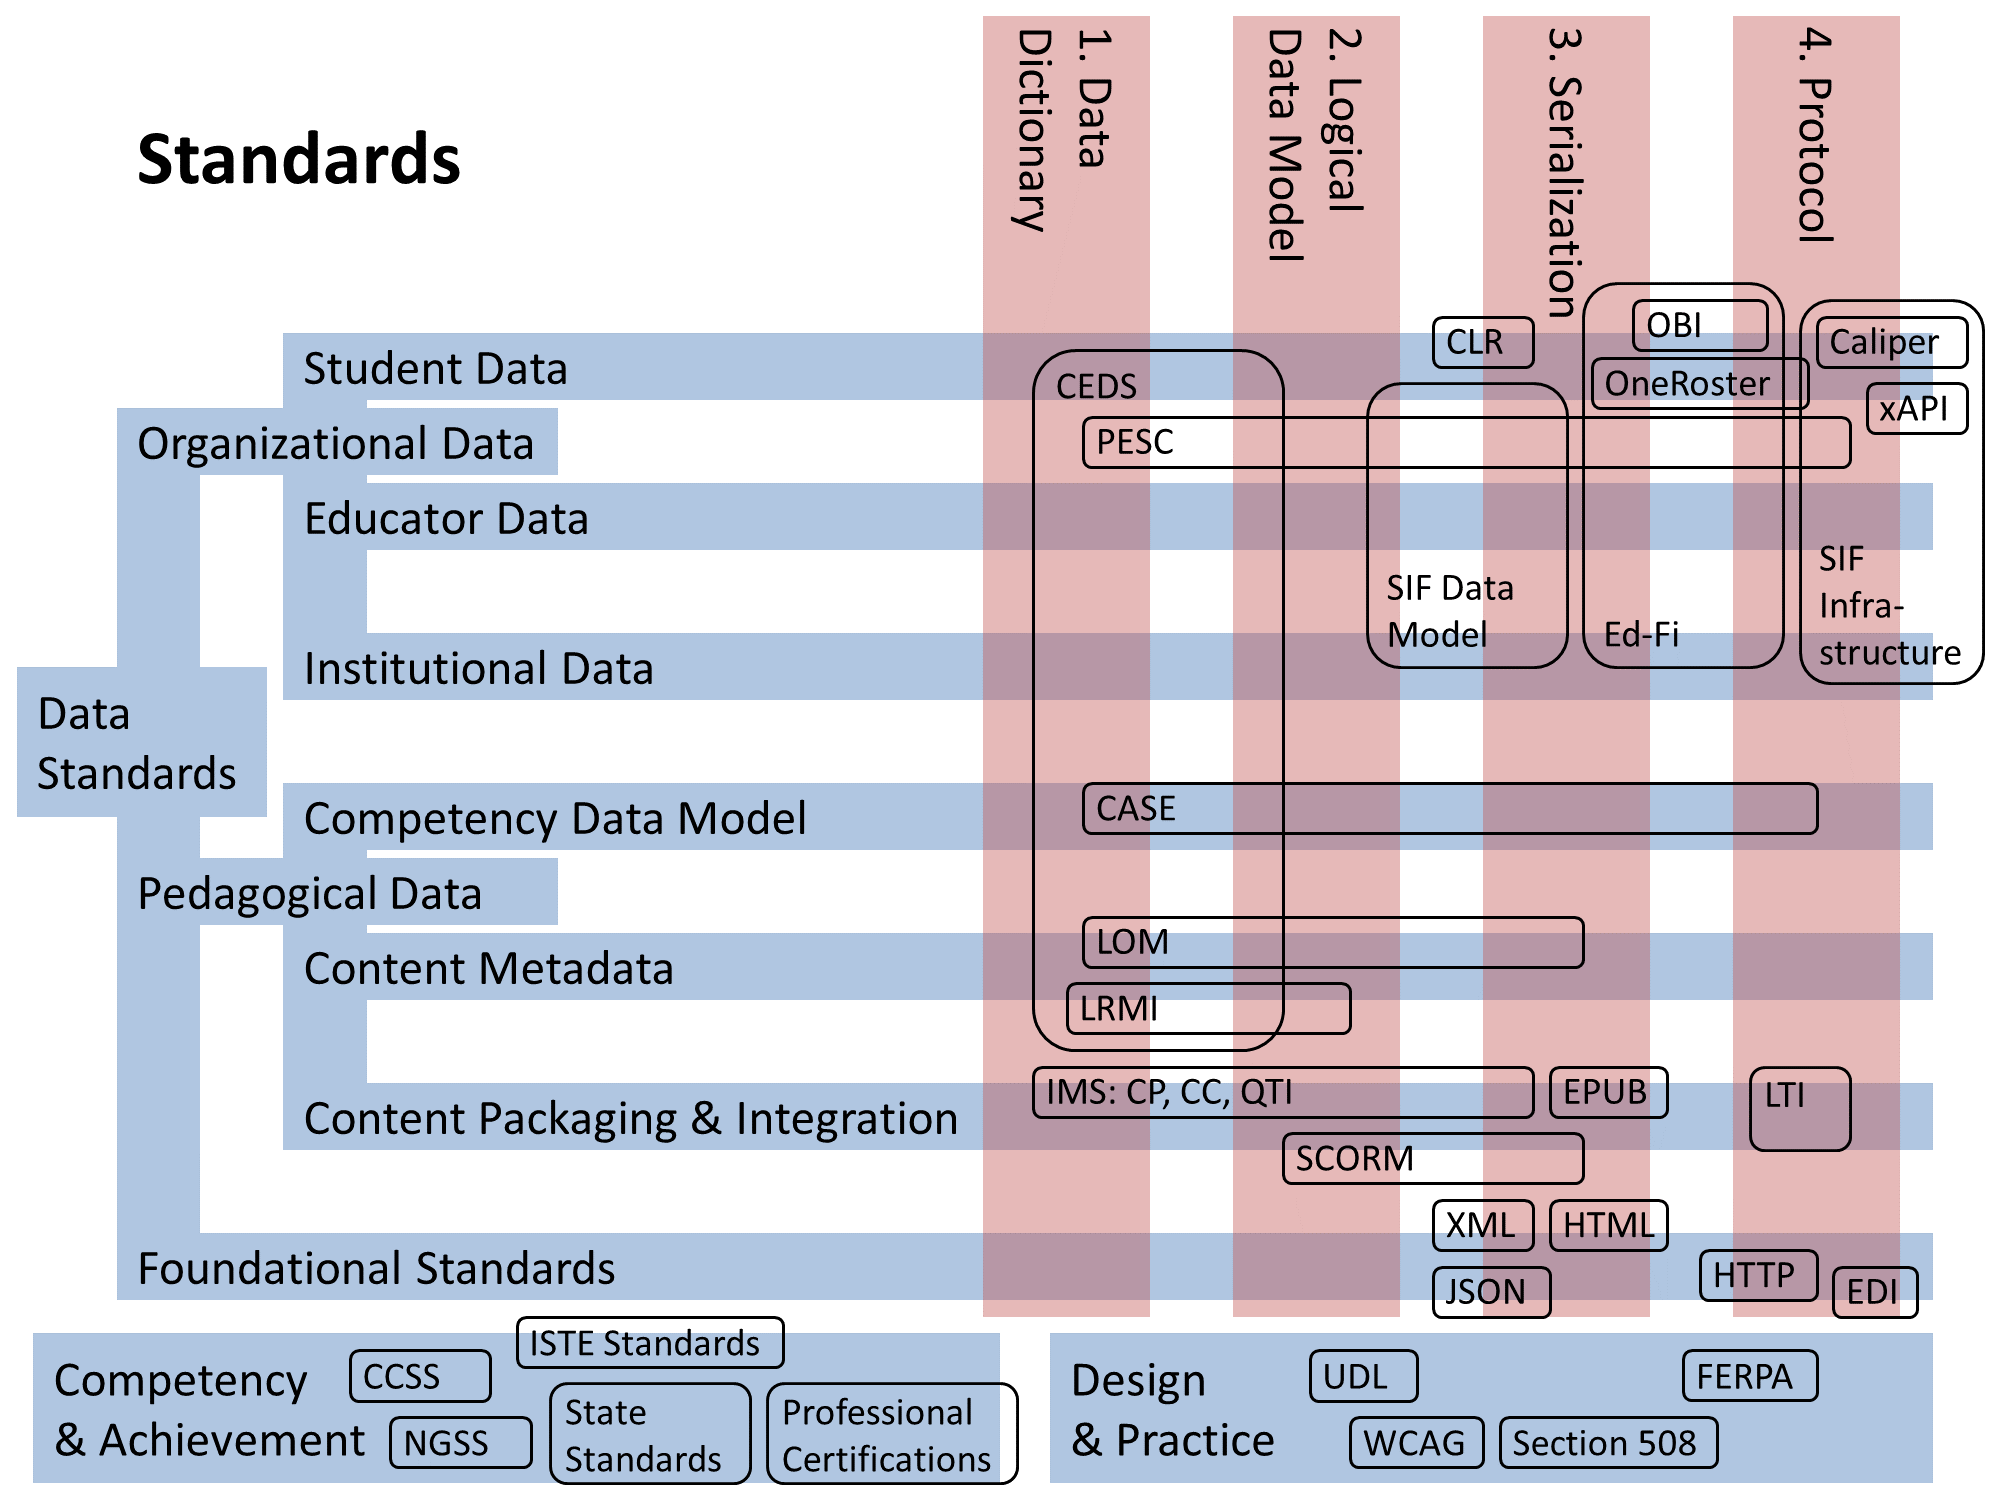 A hierarchy of educational standards matching the descriptions in the text.